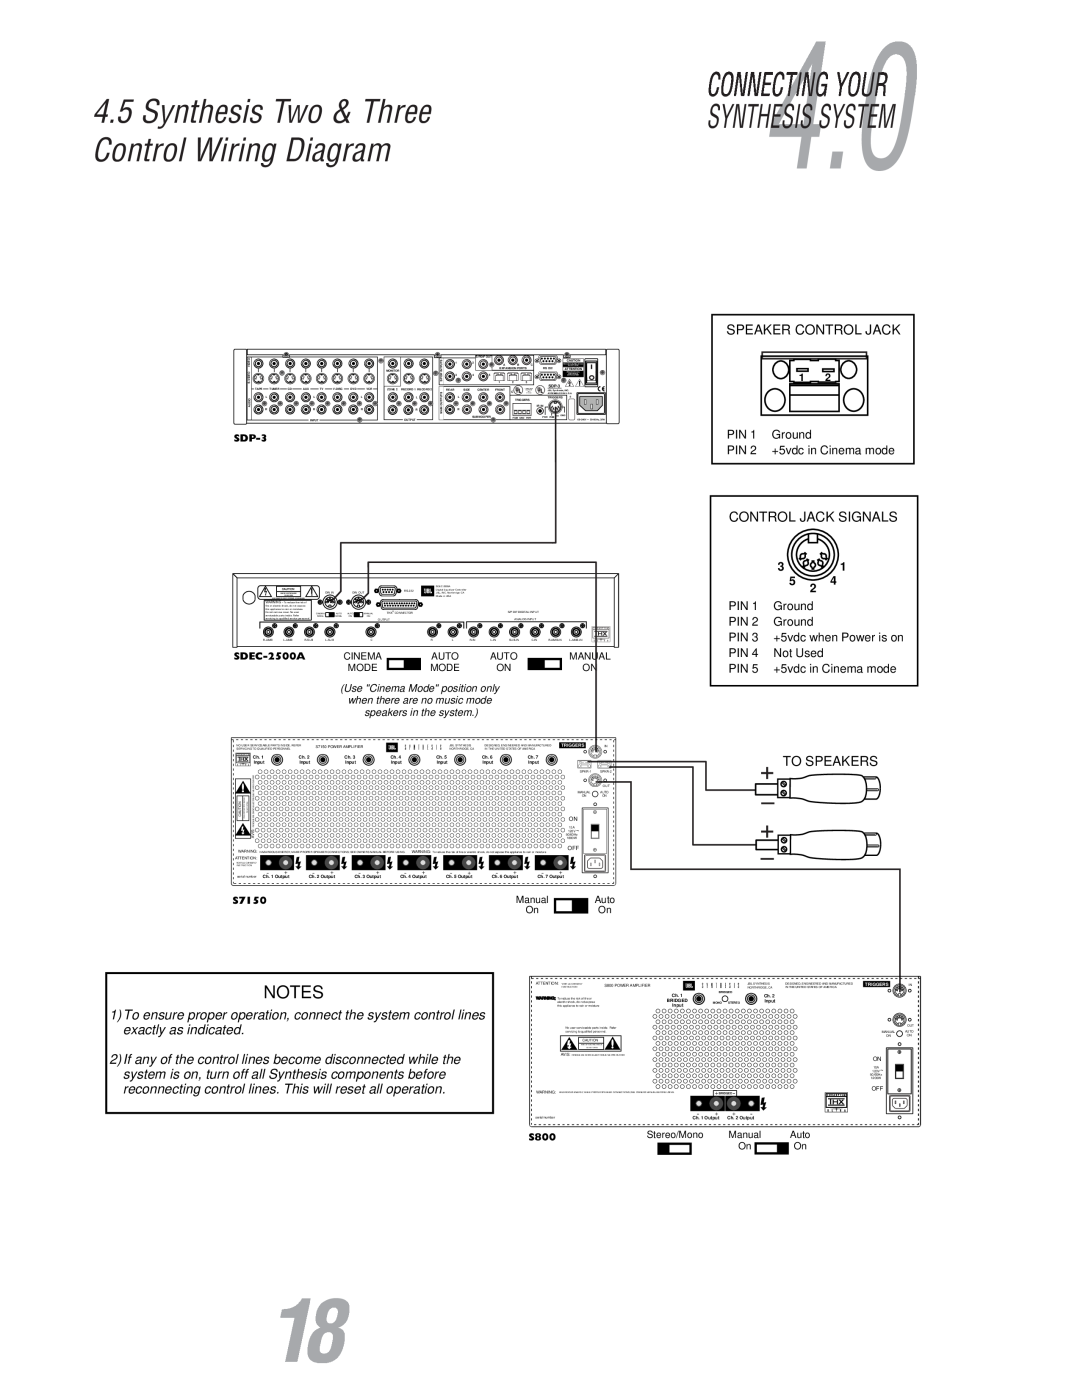 JBL S800 Synthesis Two & ThreeSYNTHESIS SYSTEM, Control Wiring Diagram, CONNECTING4.YOUR0, Speaker Control Jack, Ground 